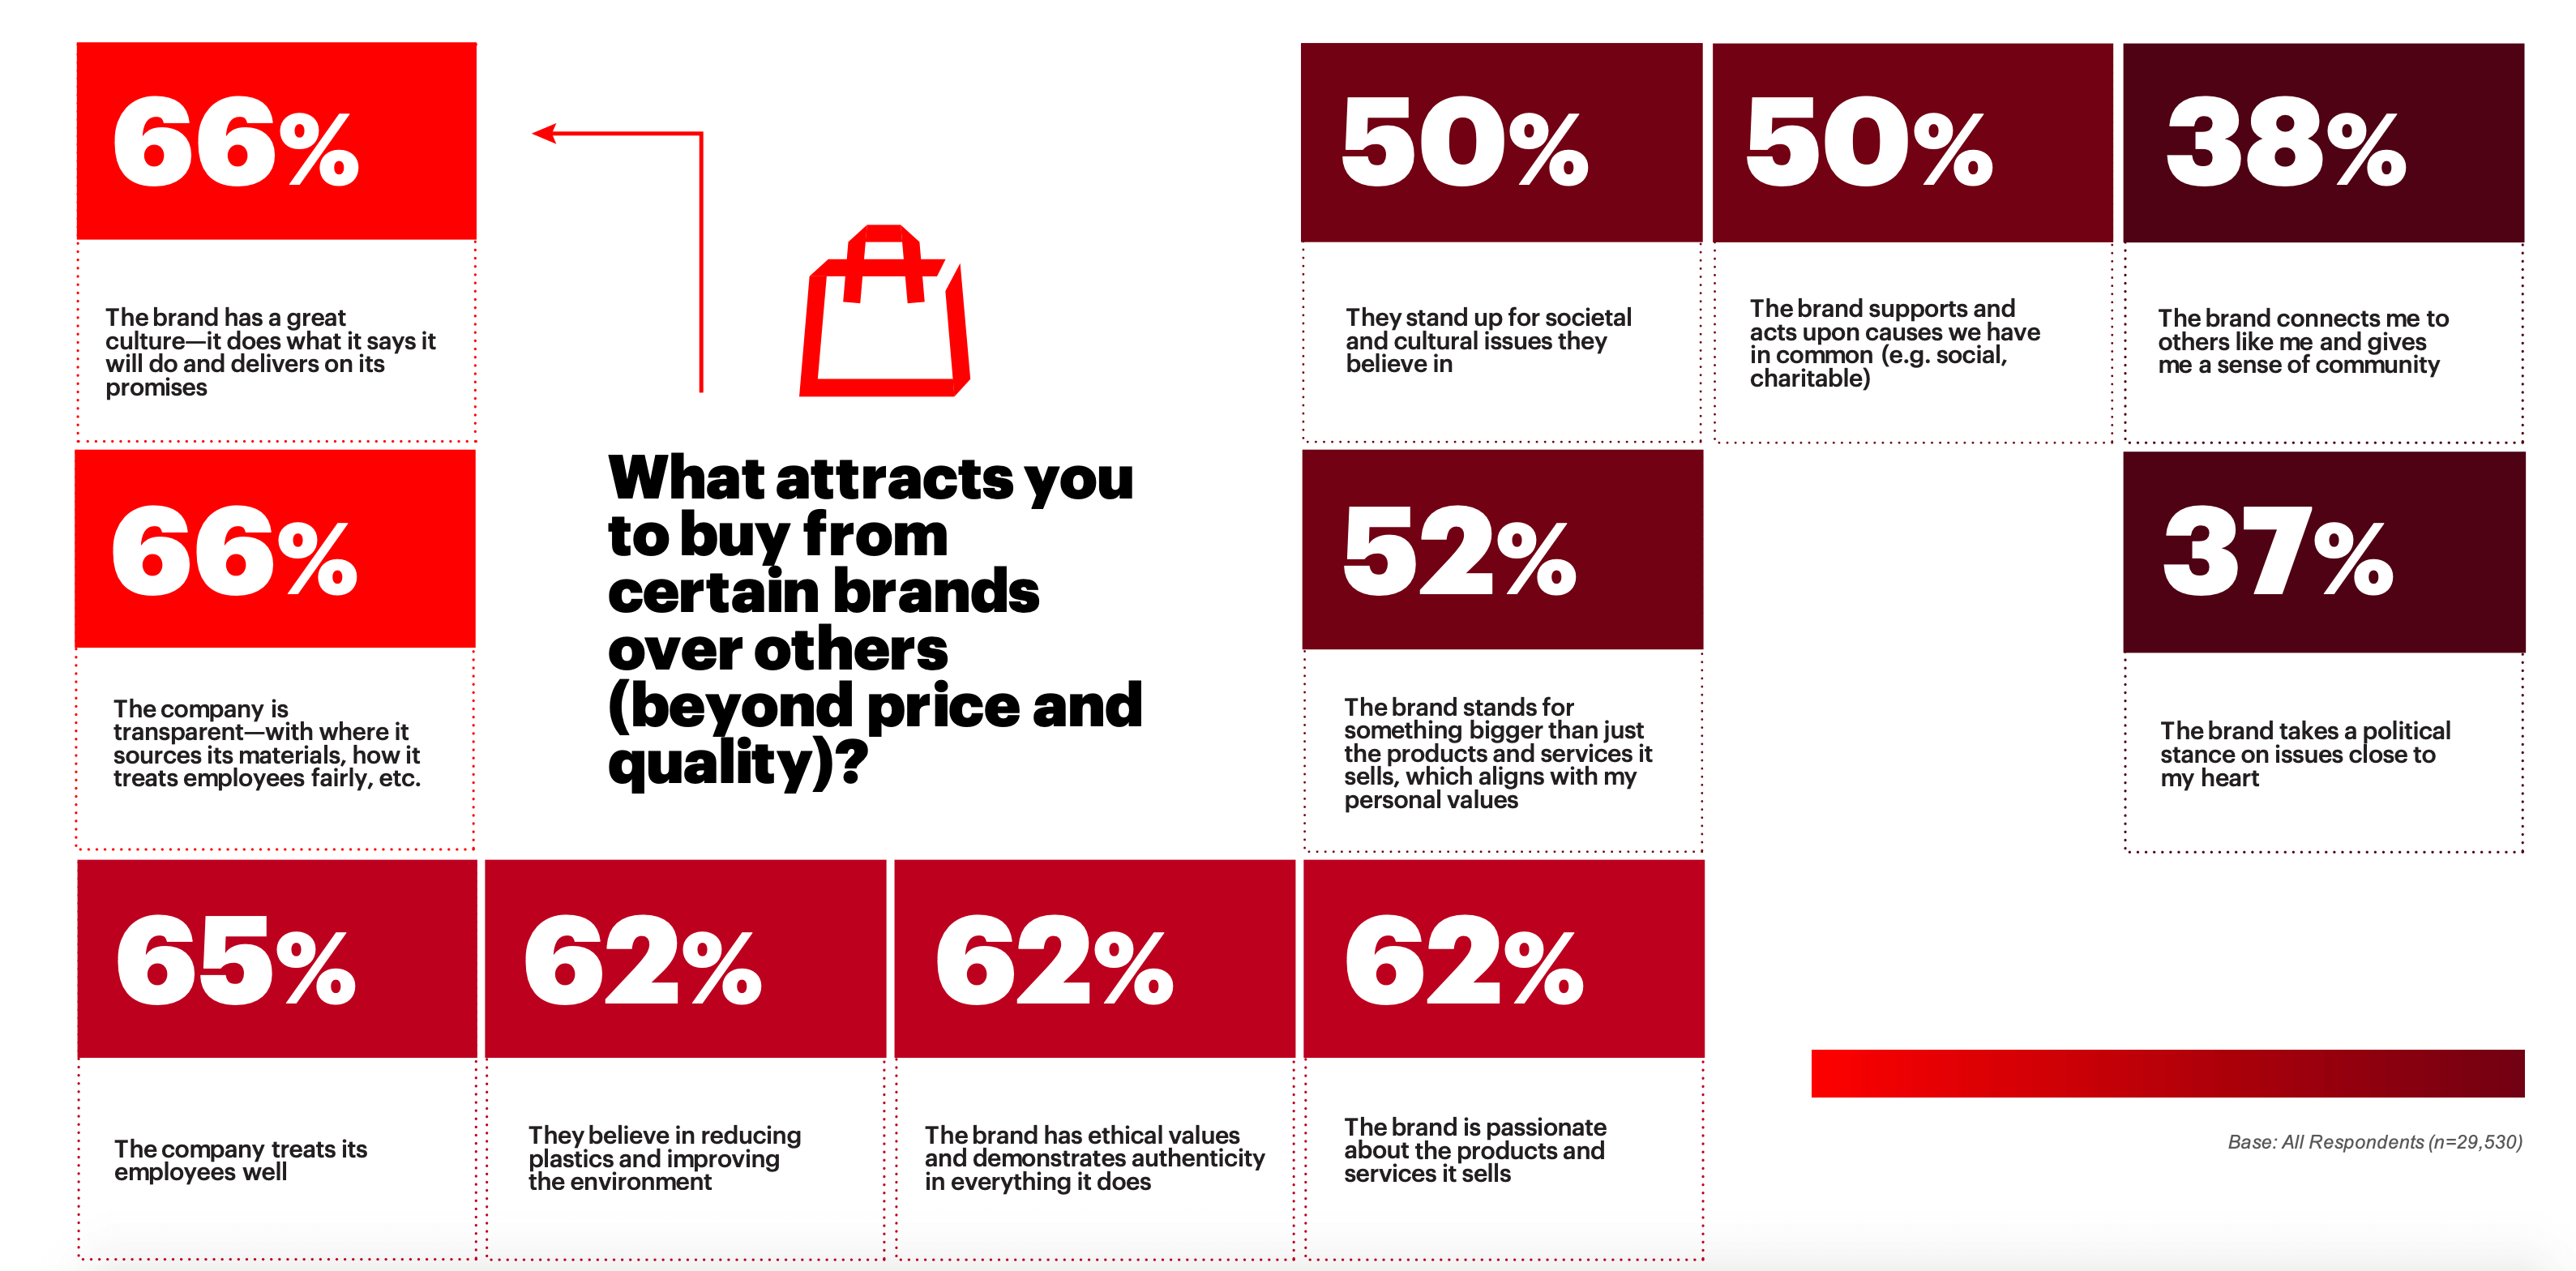 a breakdown of survey results - "What attracts you to buy from certain brands over others, beyond price and quality)"